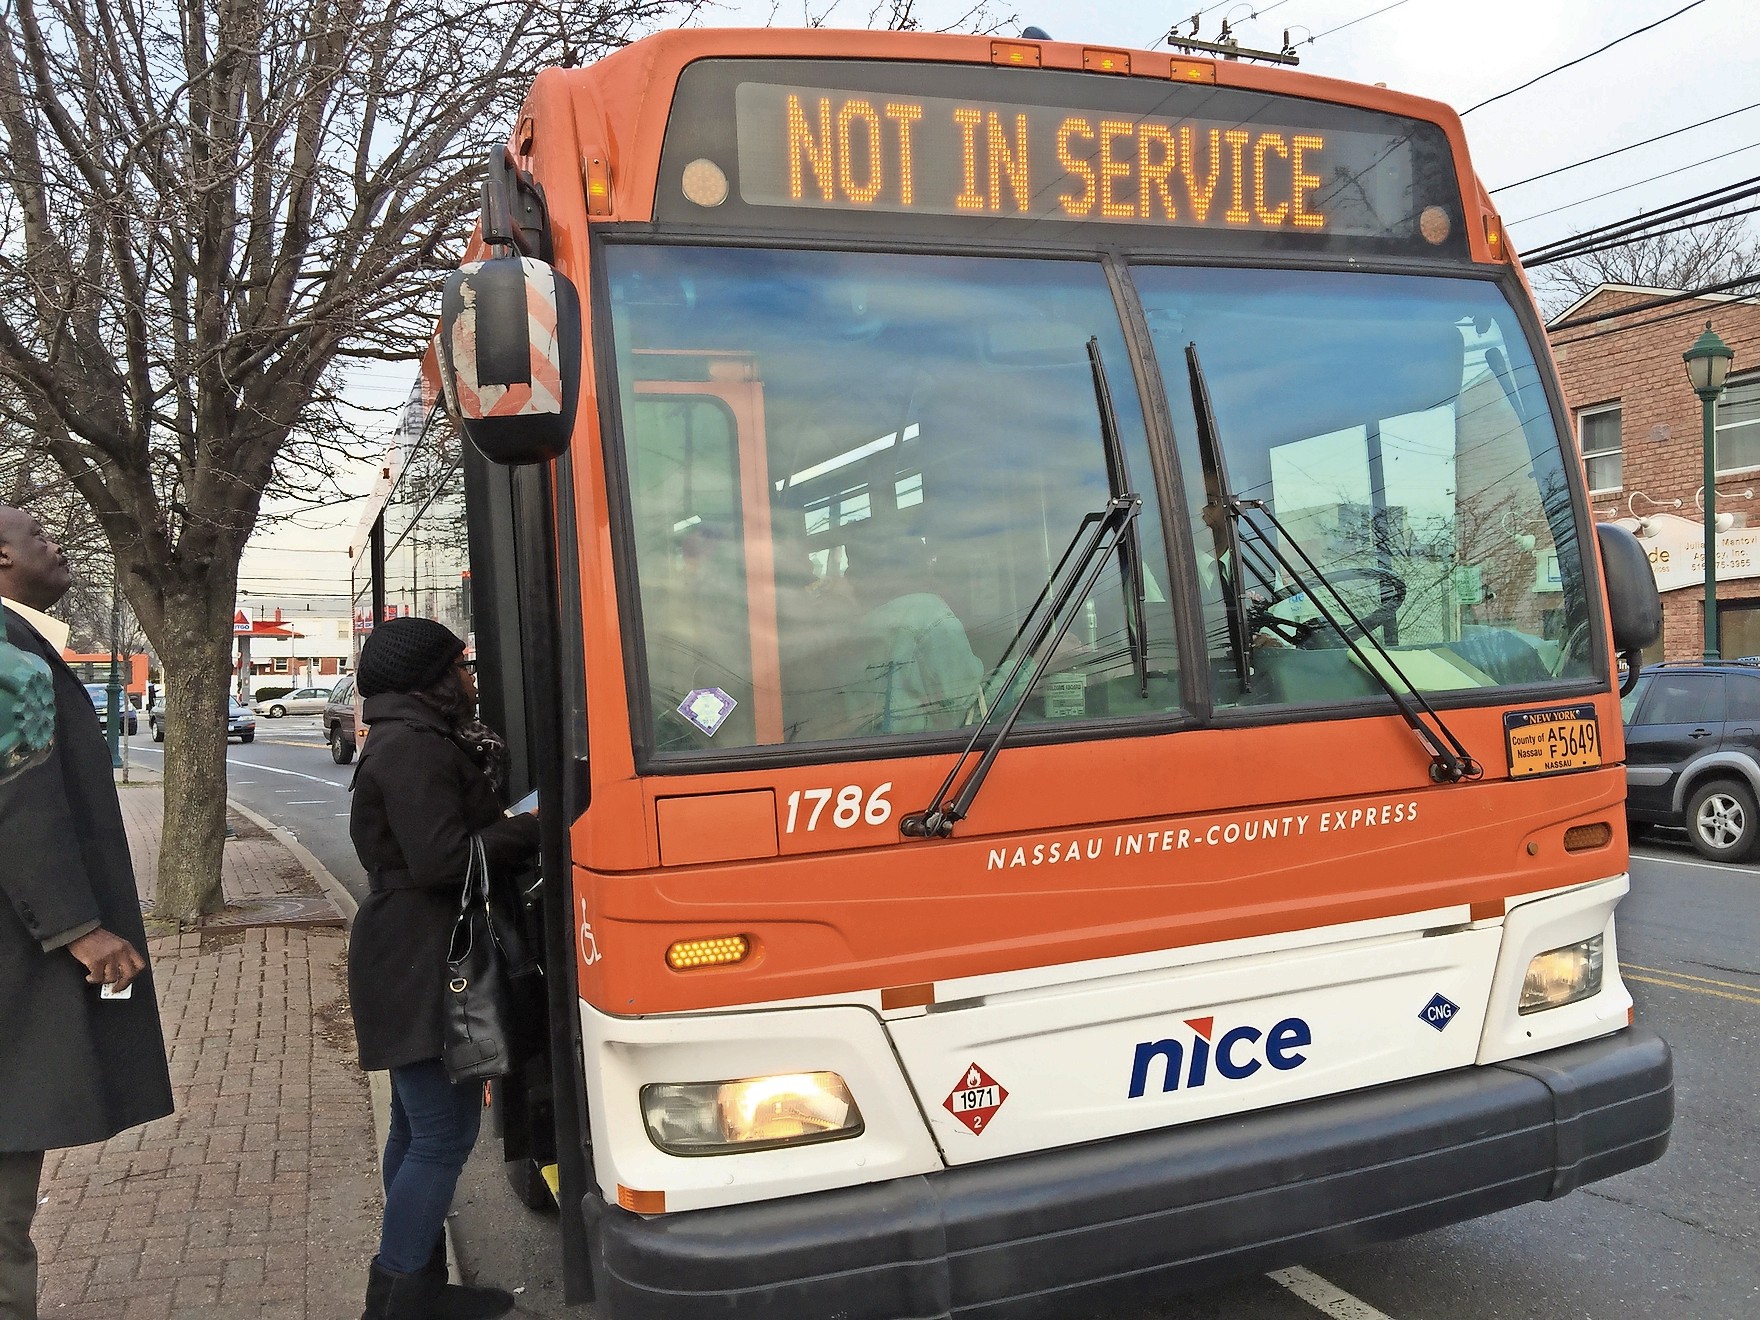 The N2/8 bus will be restored with a revised route, NICE spokesman Andy Kraus said.